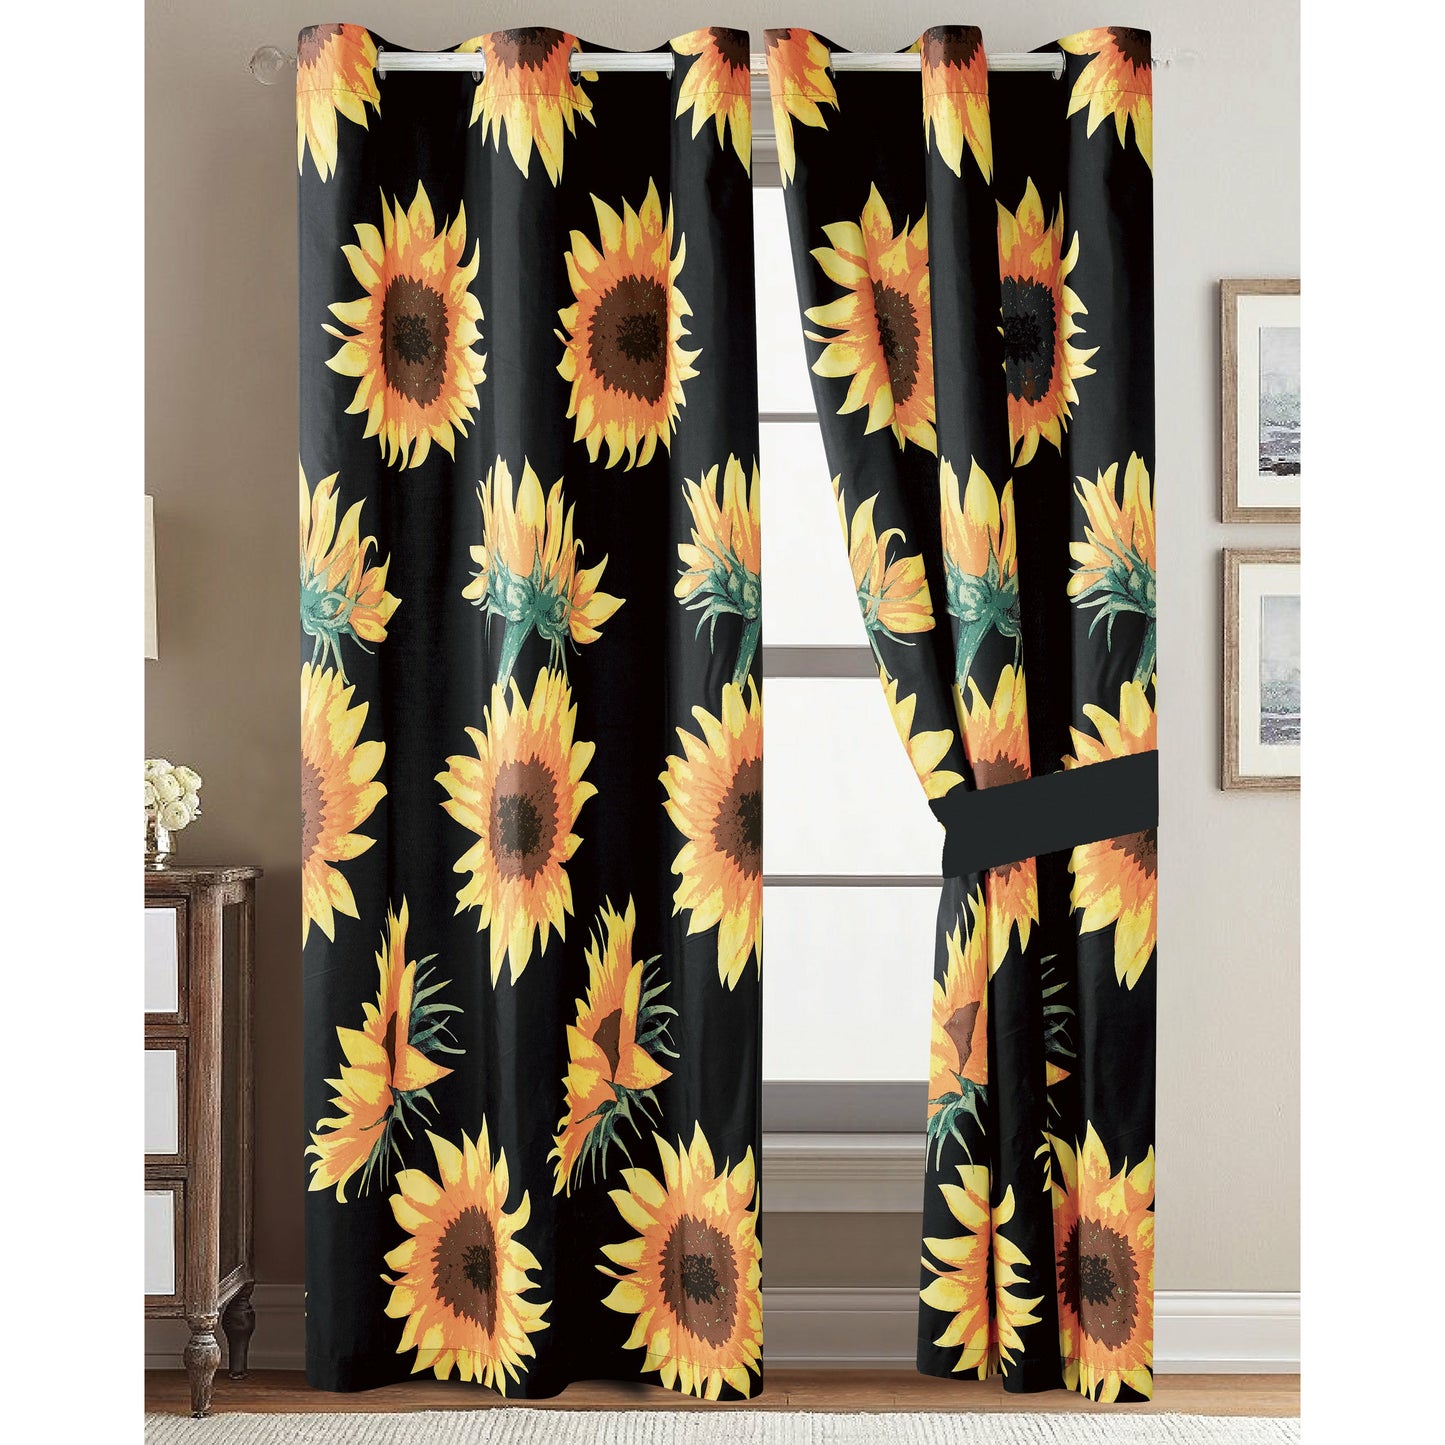 Sunflower Curtains Double Panel Pair